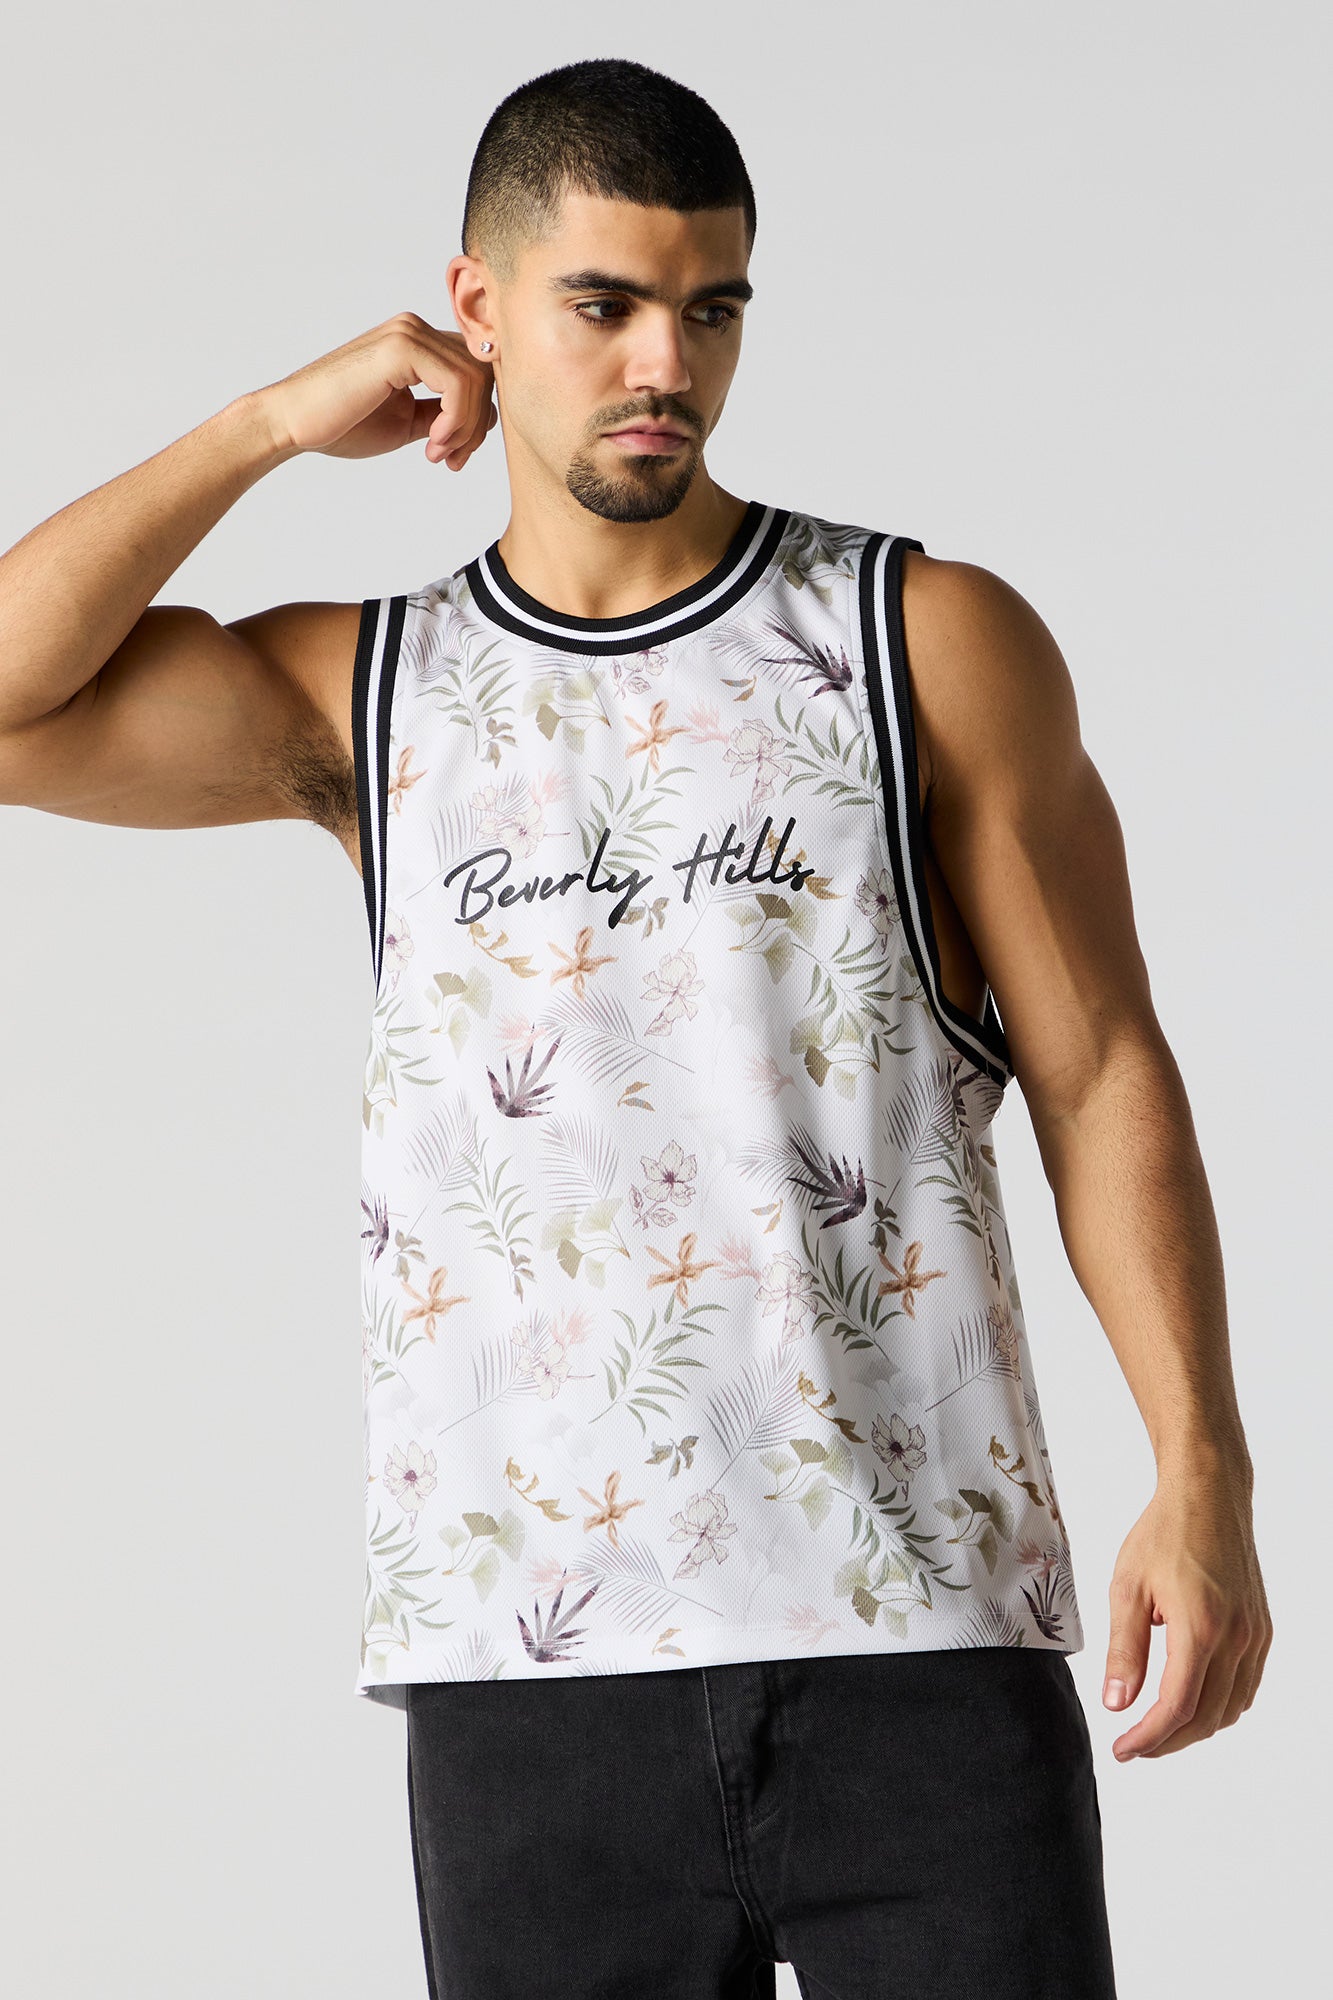 Floral Print Beverly Hills Graphic Basketball Jersey